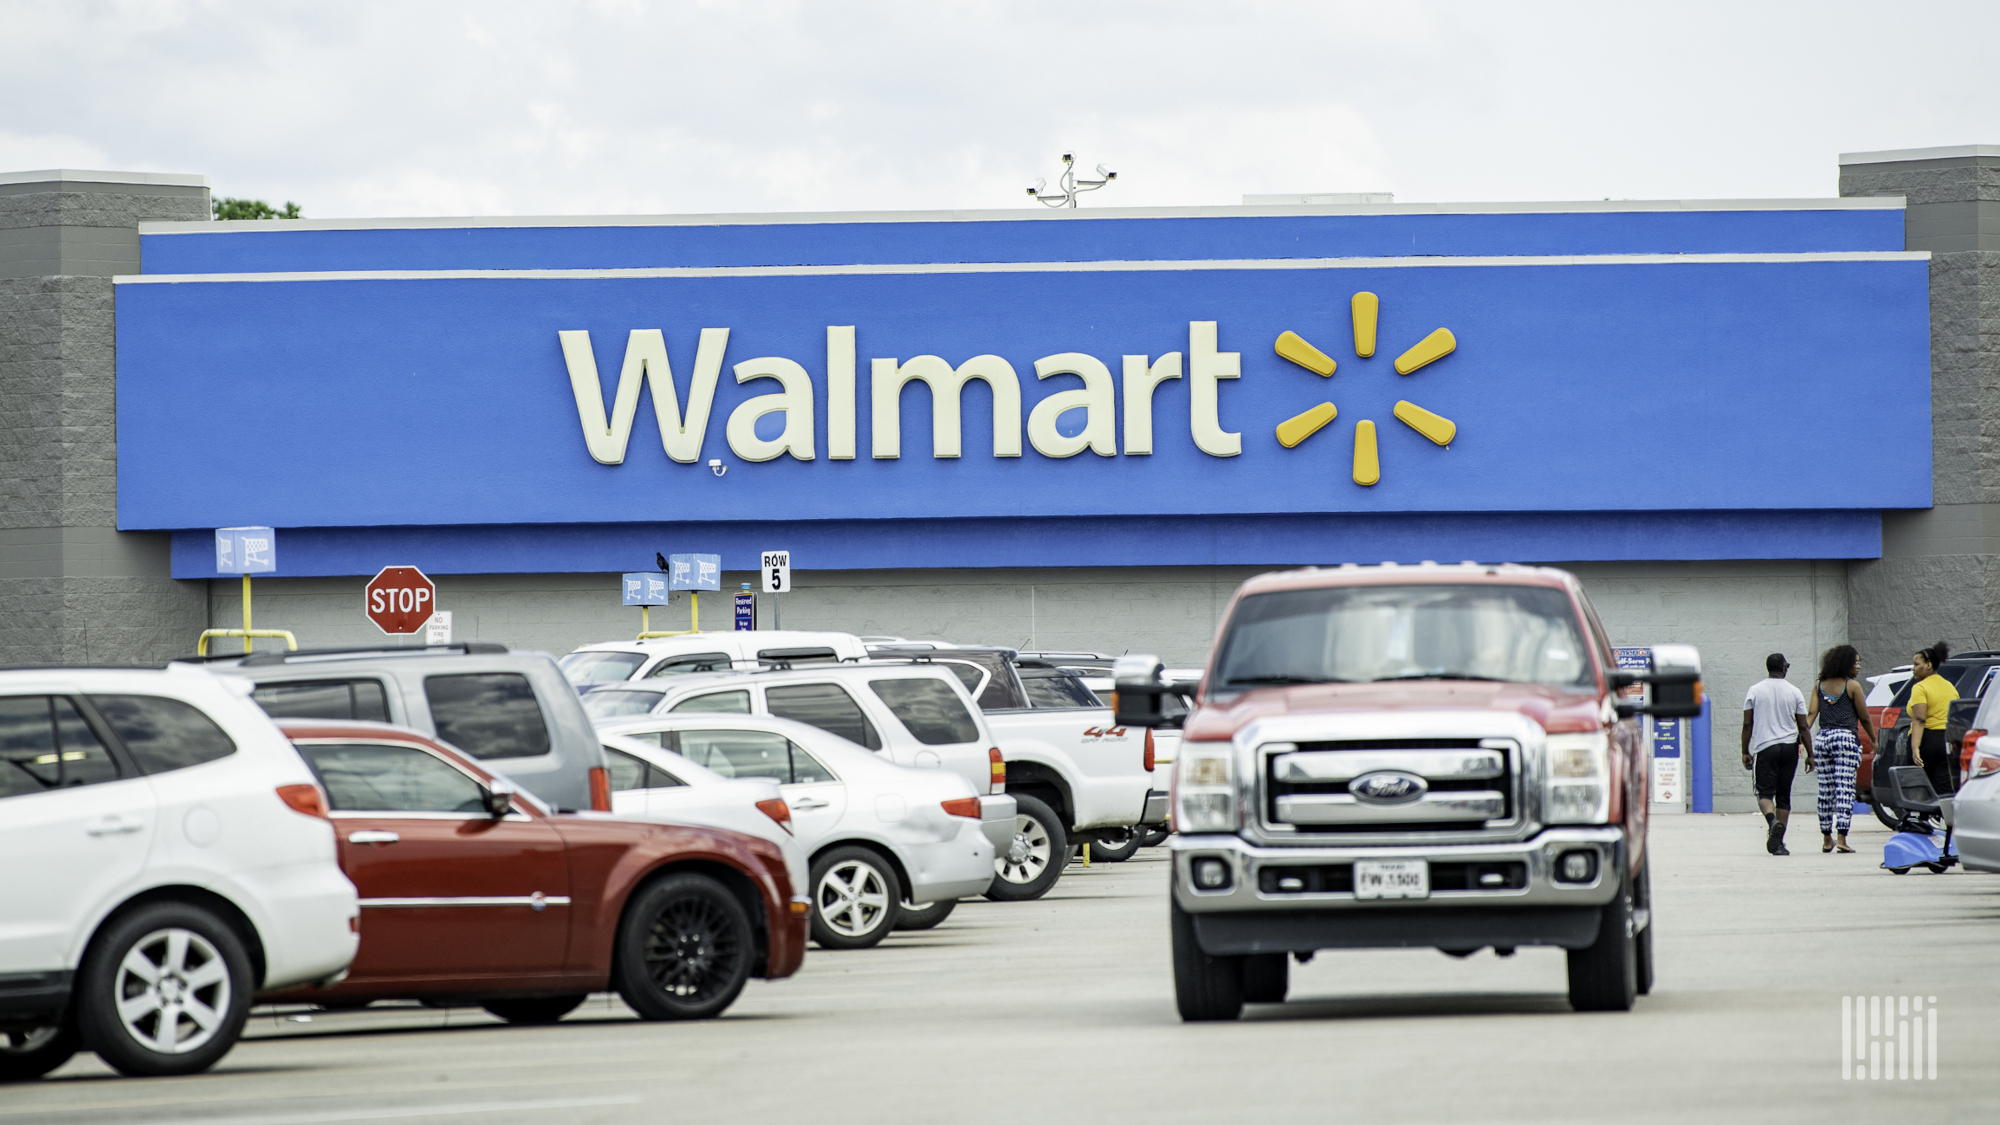 Walmart now selling e-commerce technology to small and medium sized businesses